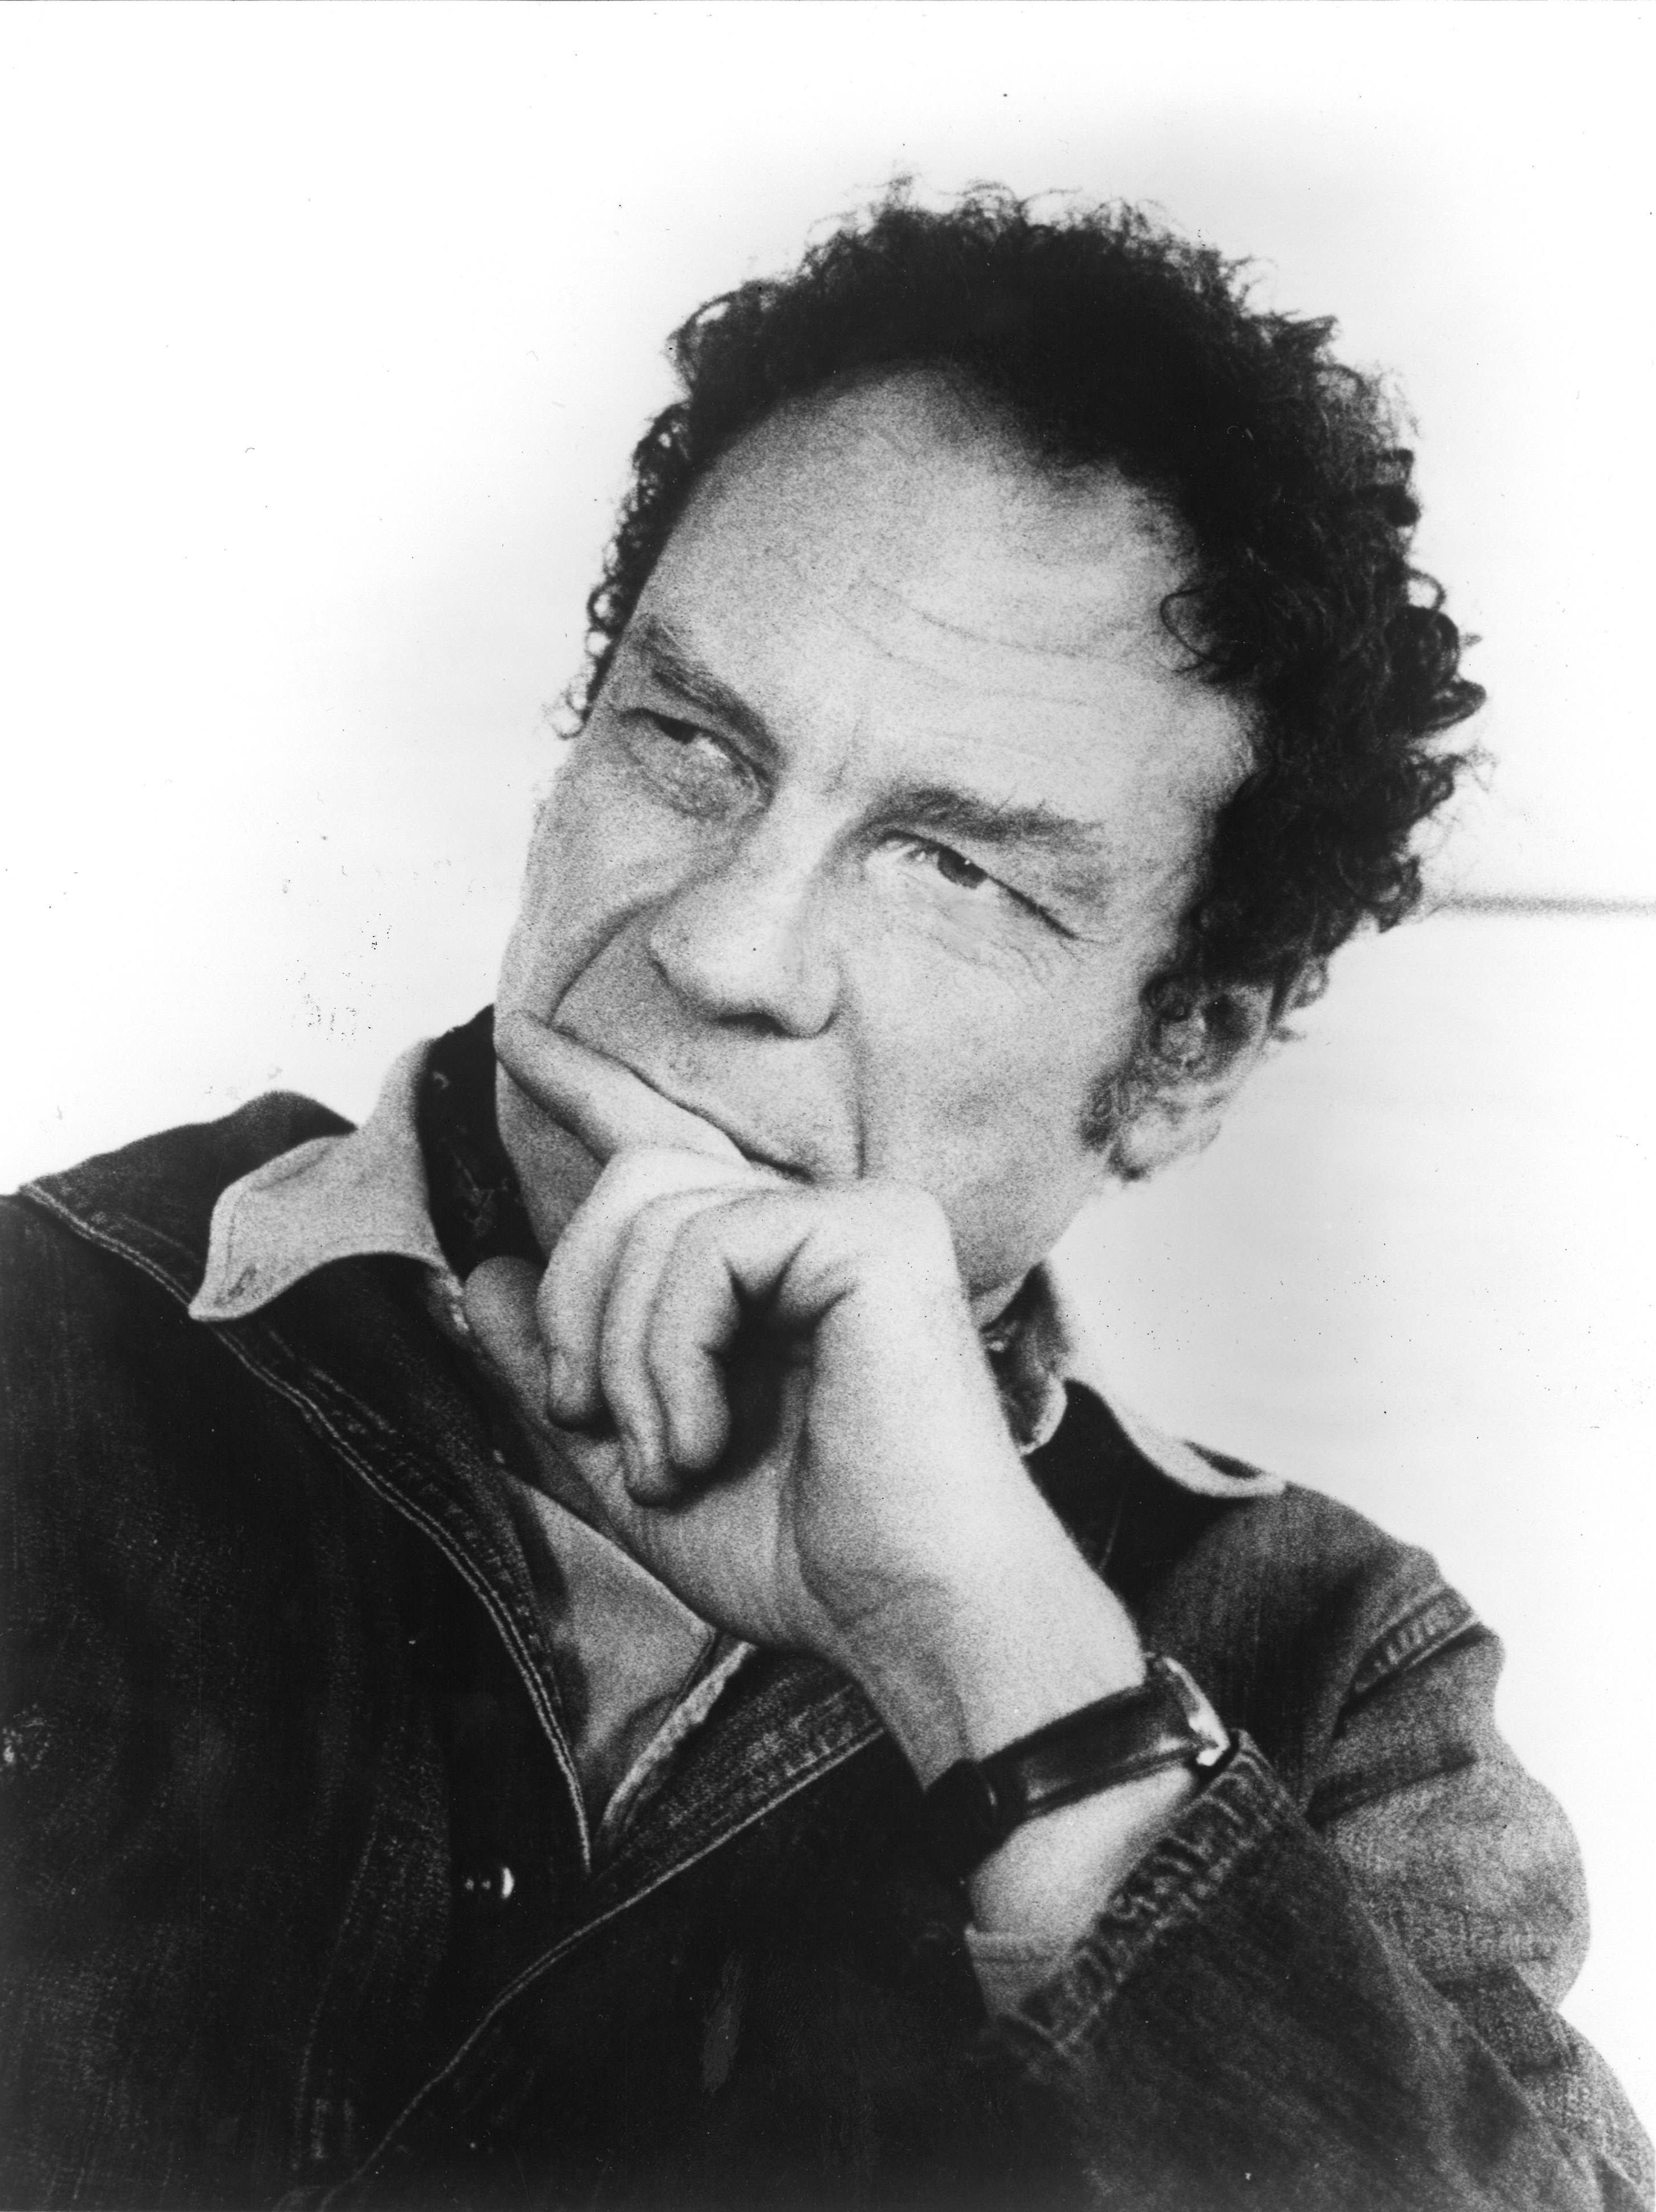 Portrait of a middle-aged Merce Cunningham. His left hand is covering his mouth as he considers something out of frame.